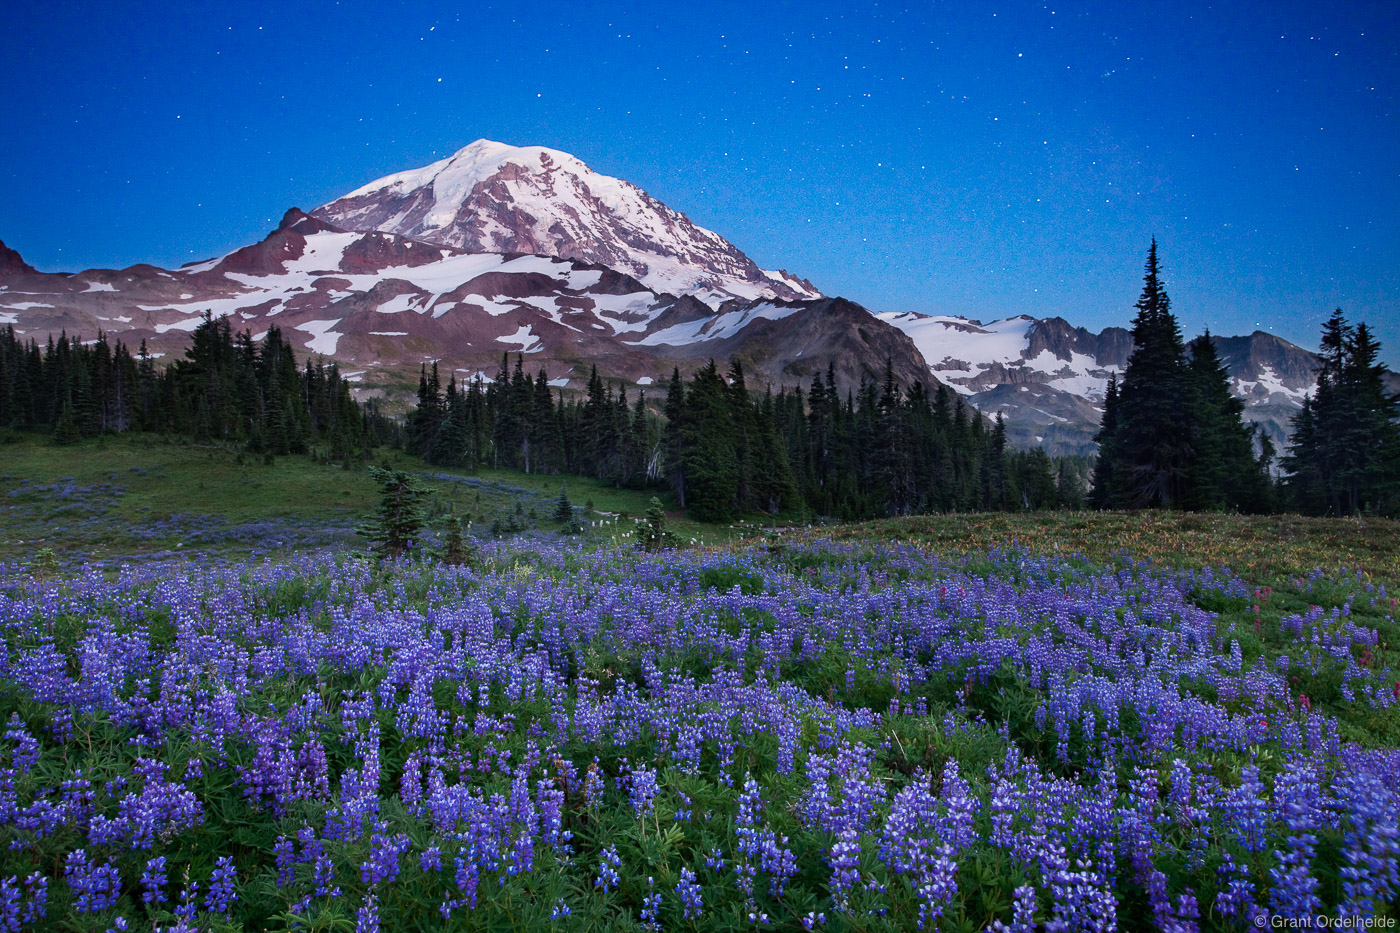 Twilight stars and lupine during a peaceful evening at Spray Park in Mt. Rainier National Park.